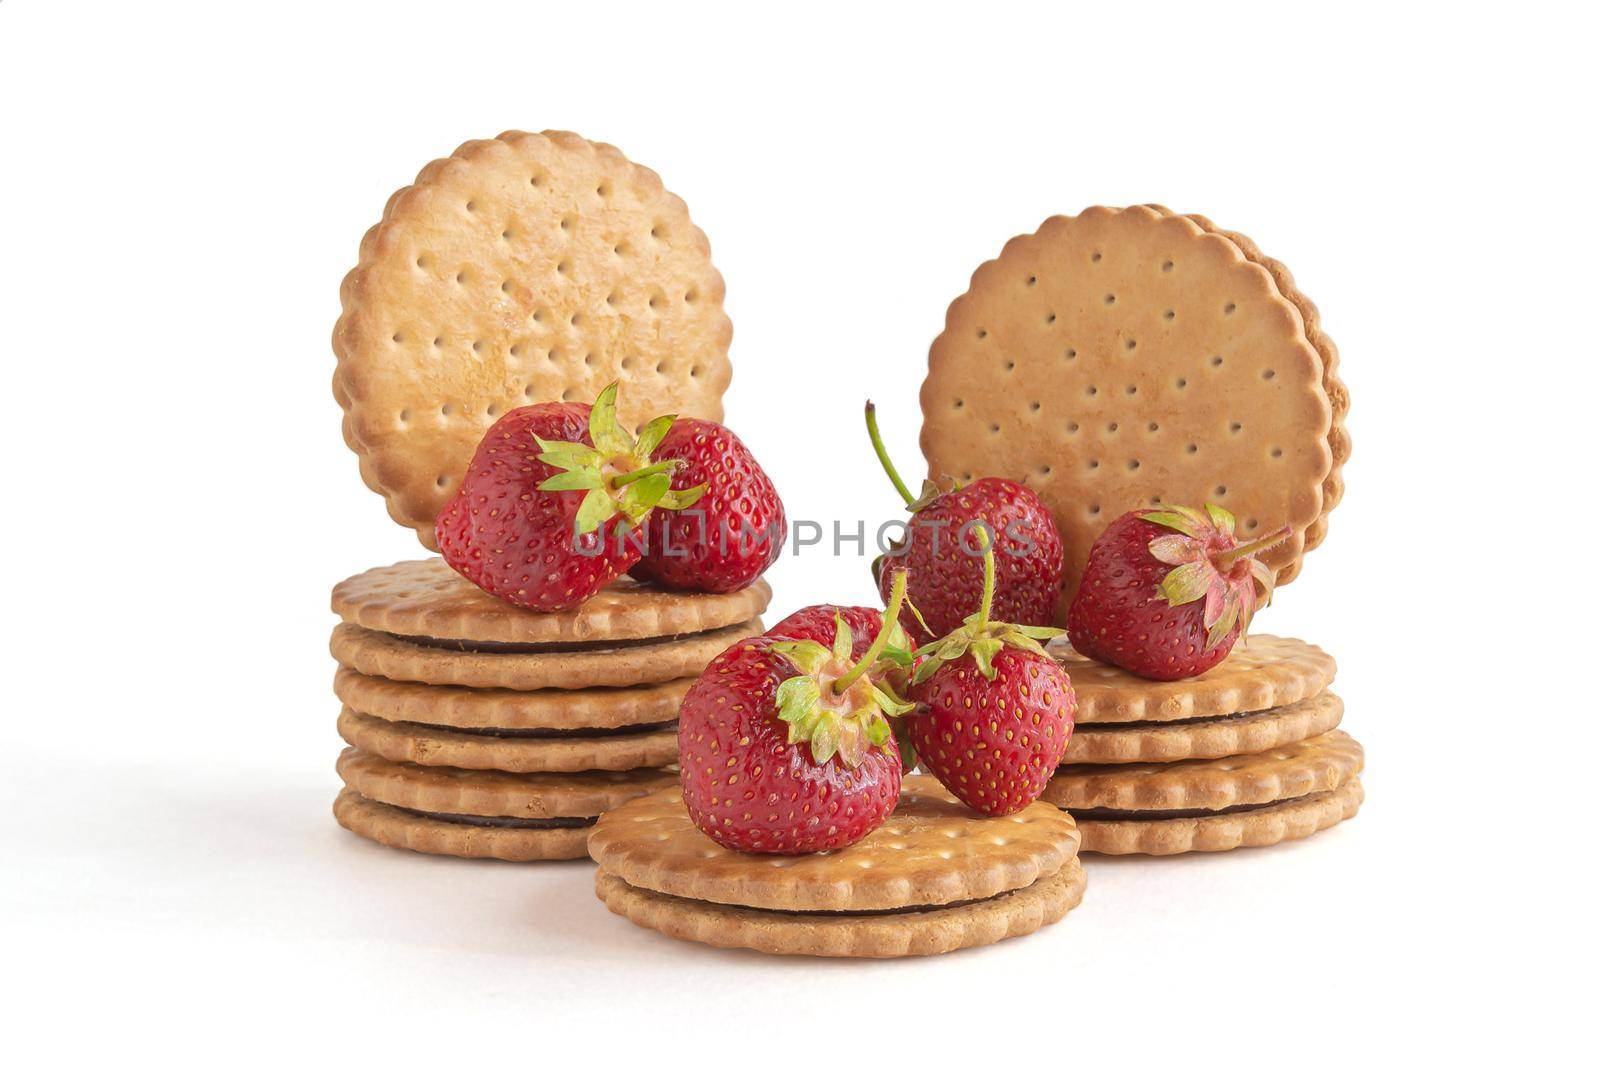 Cookies and berries of a ripe lover. Items isolated on white background. Stock photography.